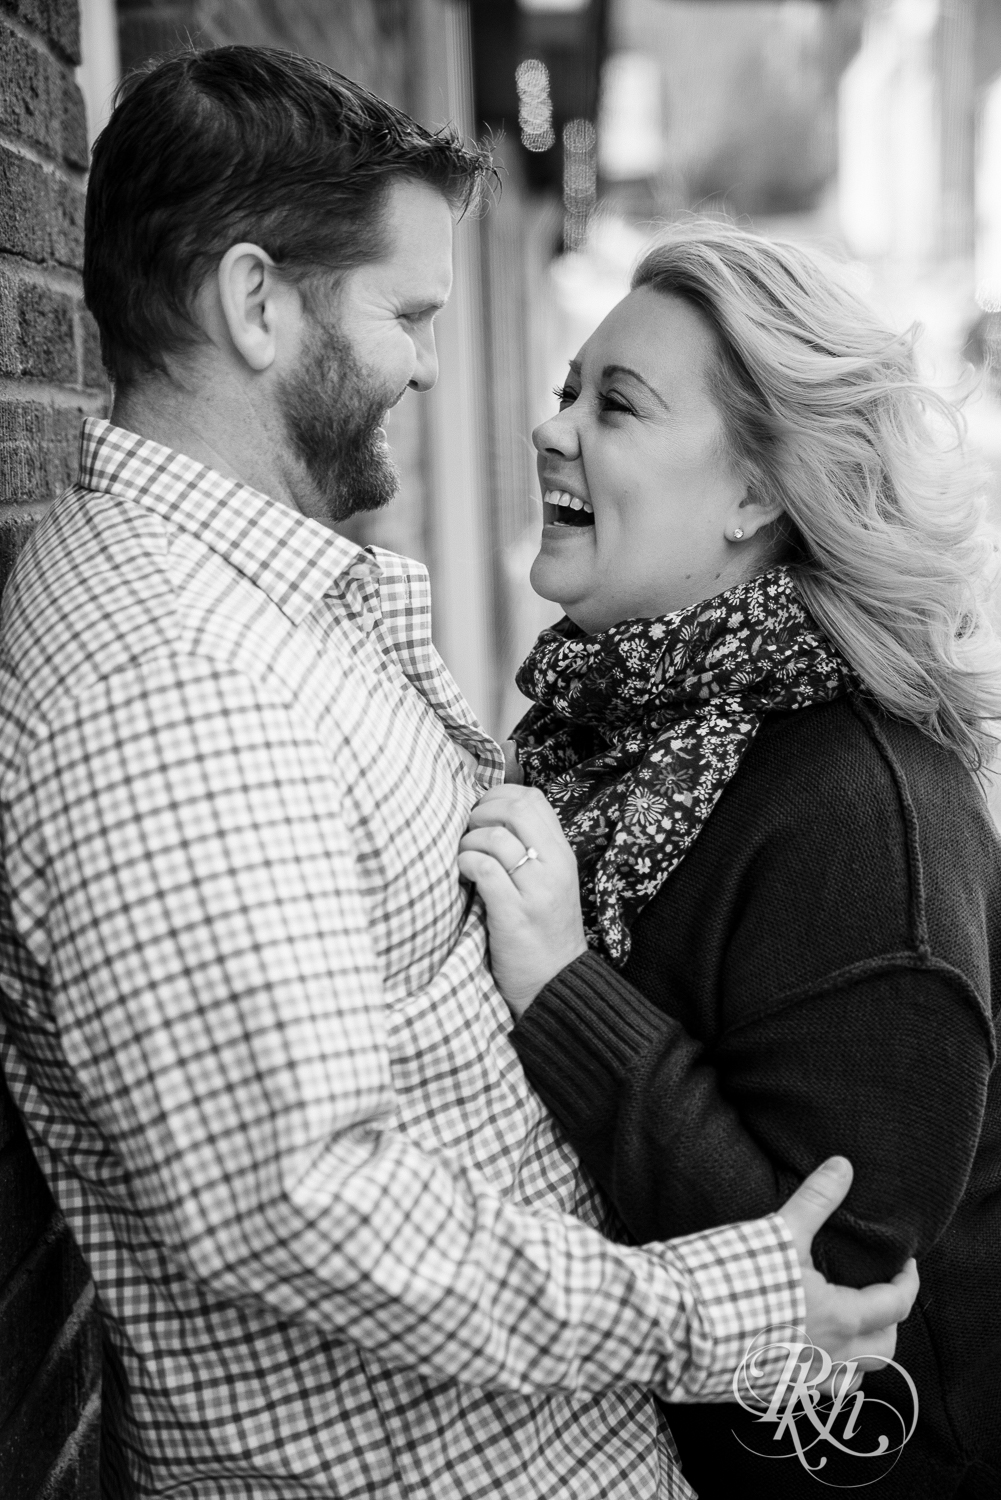 Blond woman and bearded man laugh against brick wall in Stillwater, Minnesota.